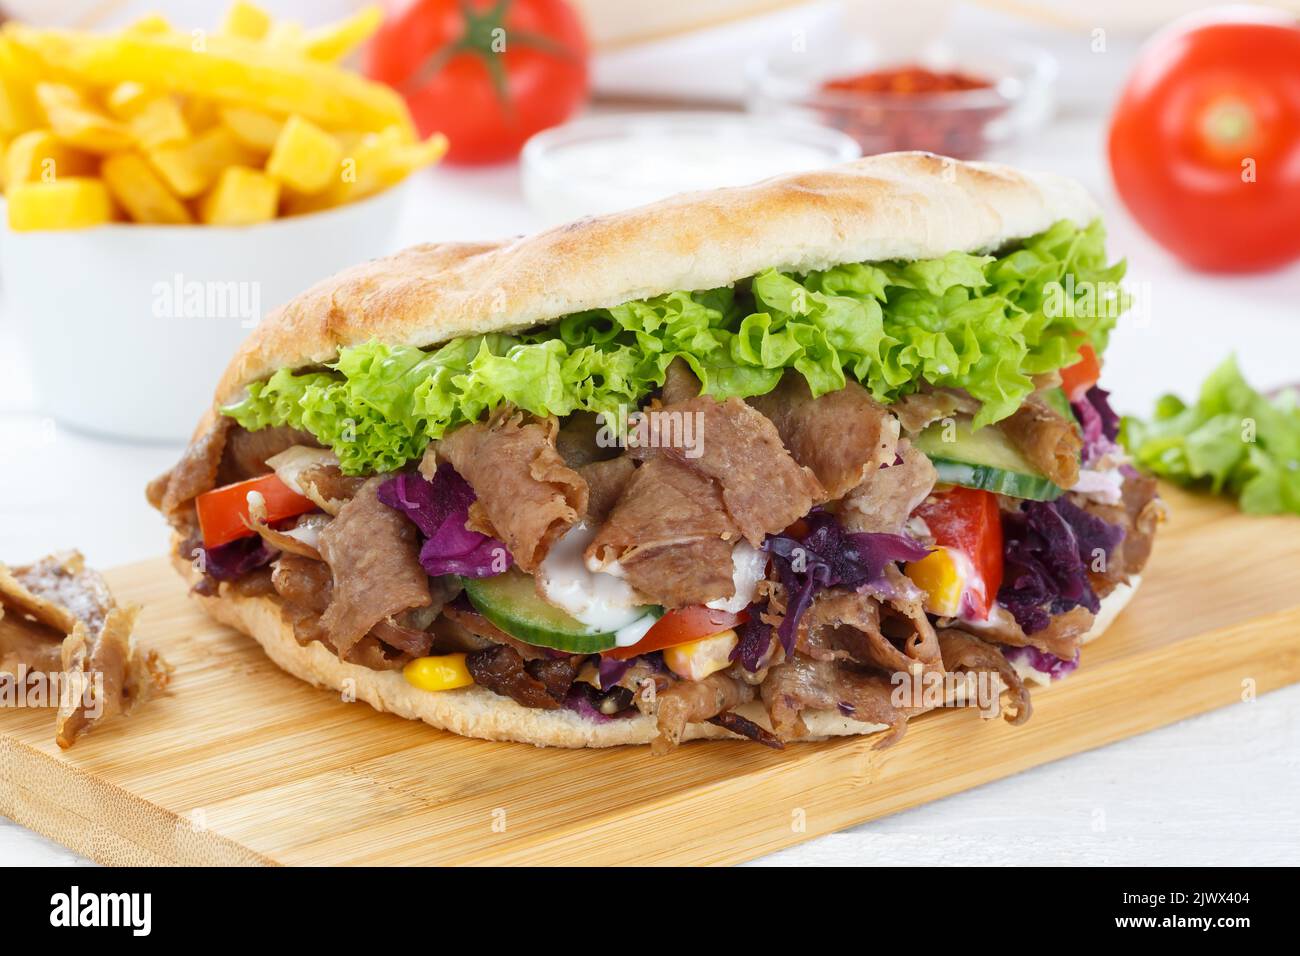 Döner Kebab Doner Kebap fast food meal in flatbread with fries on a wooden board snack Stock Photo